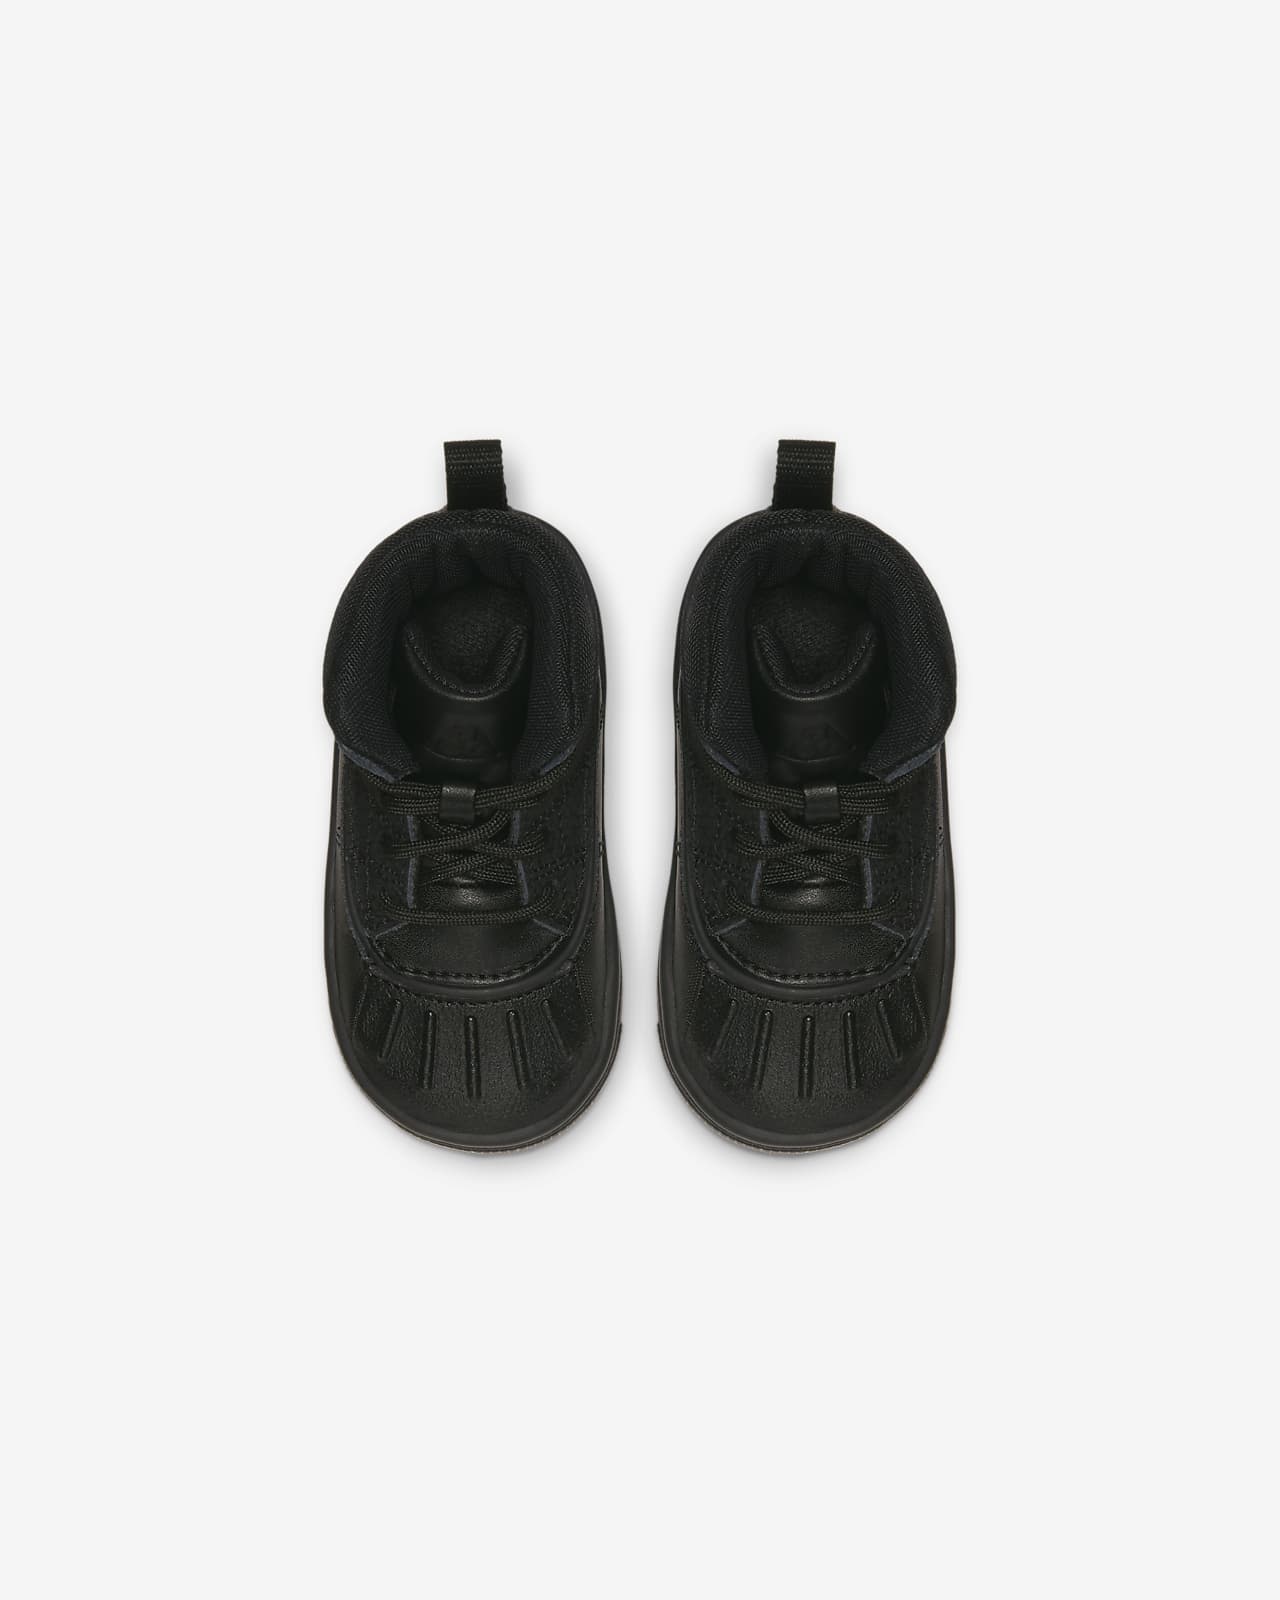 nike acg woodside toddler boots